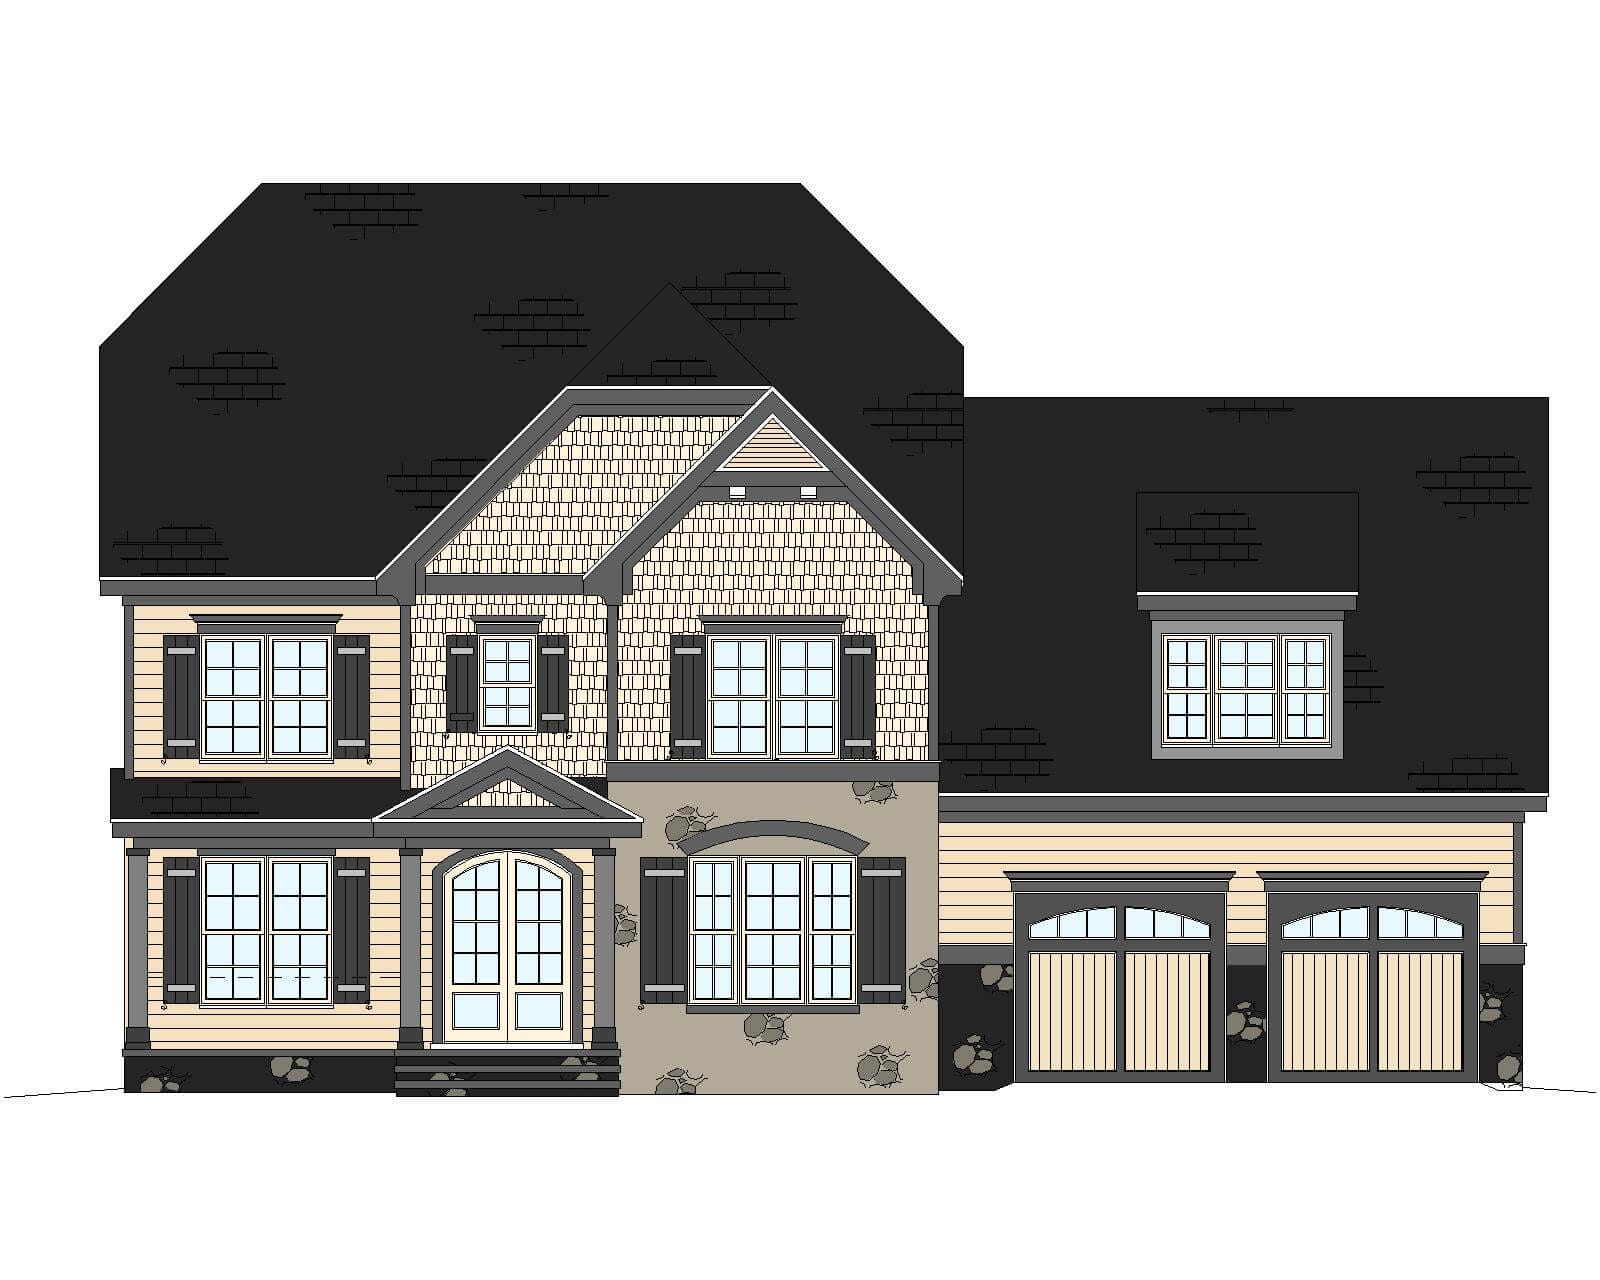 Architectural plan of a two-story house with a textured roof, featuring a prominent front porch, multiple windows, and a double garage. The facade includes brick and siding details, rendered in grayscale.